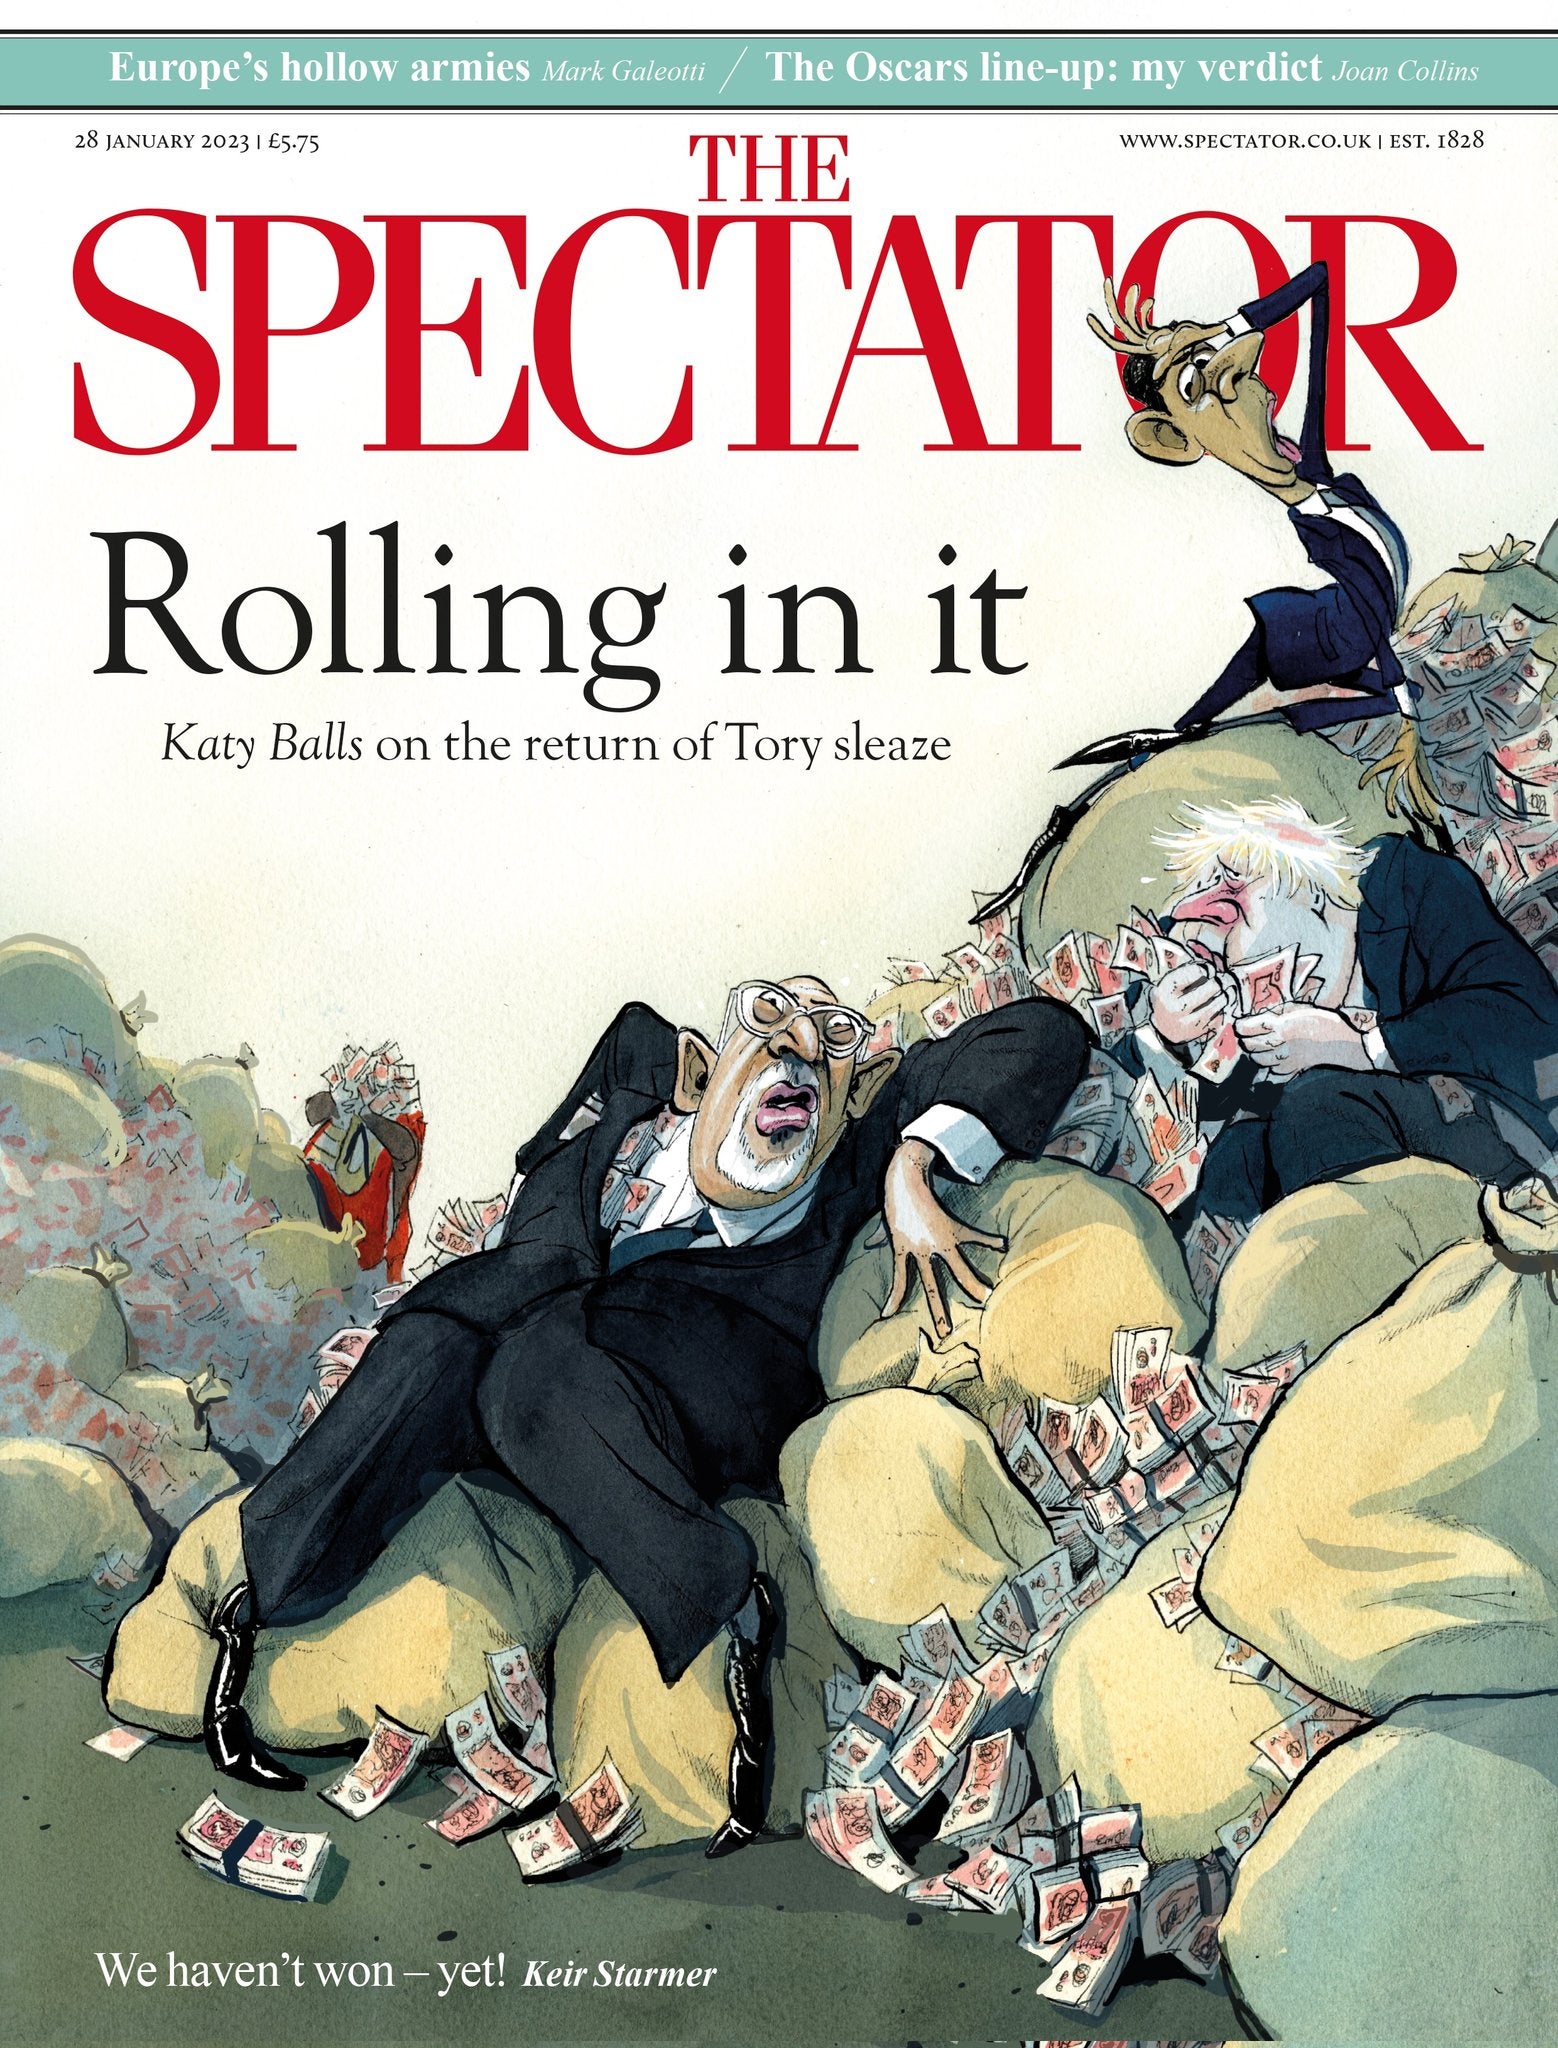 Latest Spectator front cover